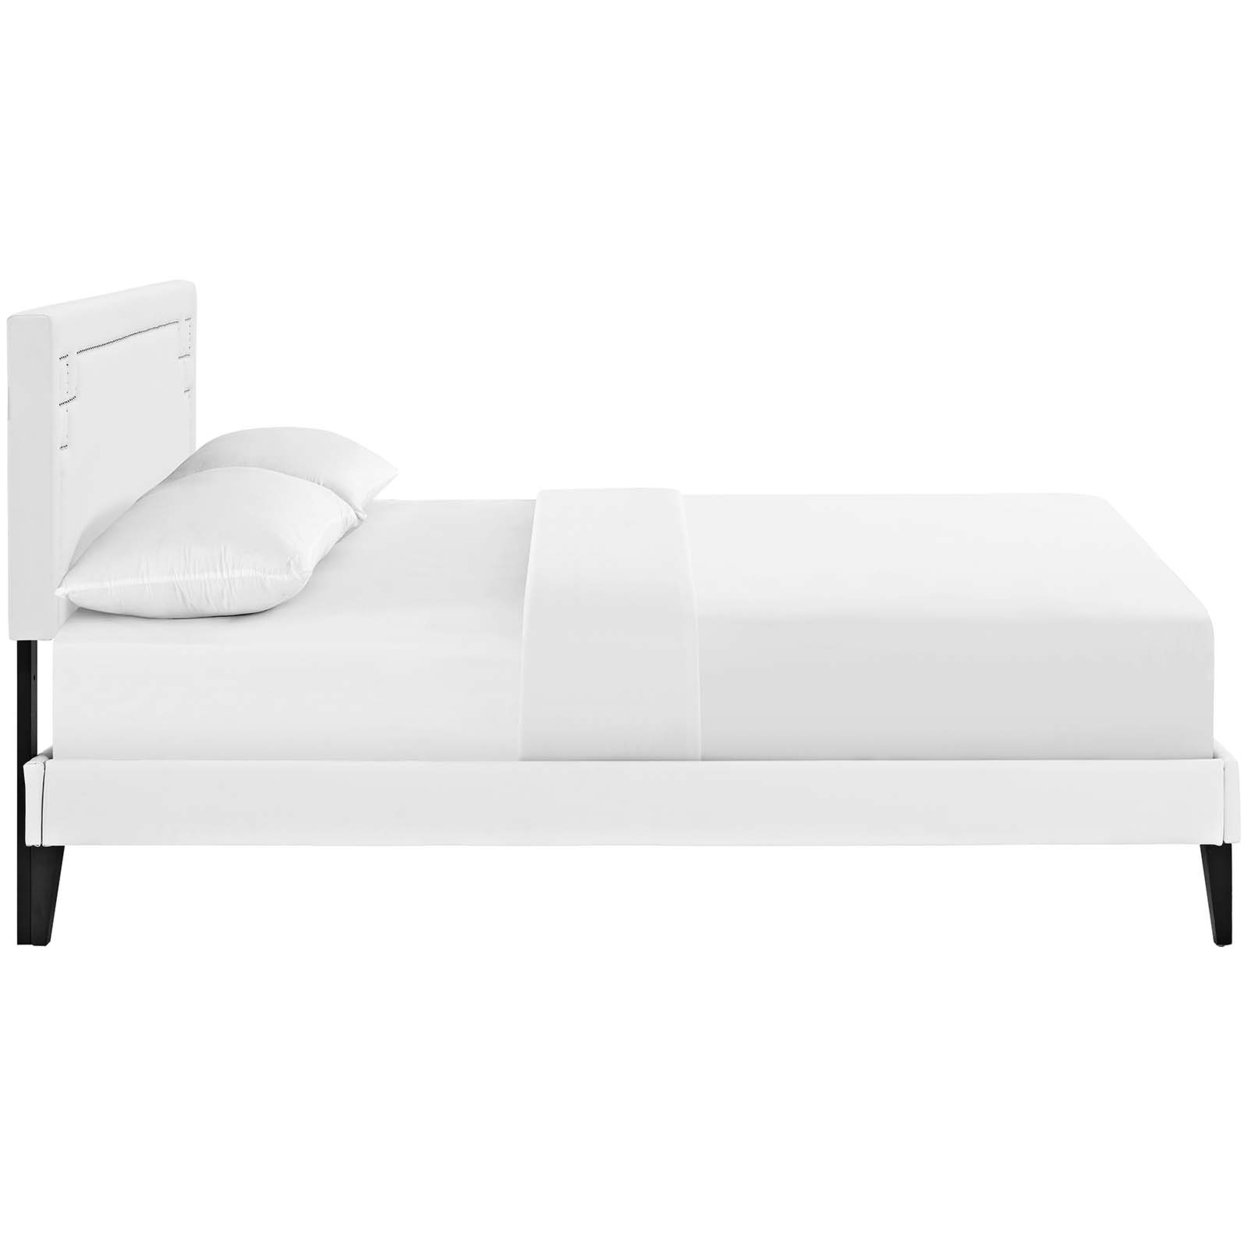 Ruthie Queen Vinyl Platform Bed With Squared Tapered Legs, White